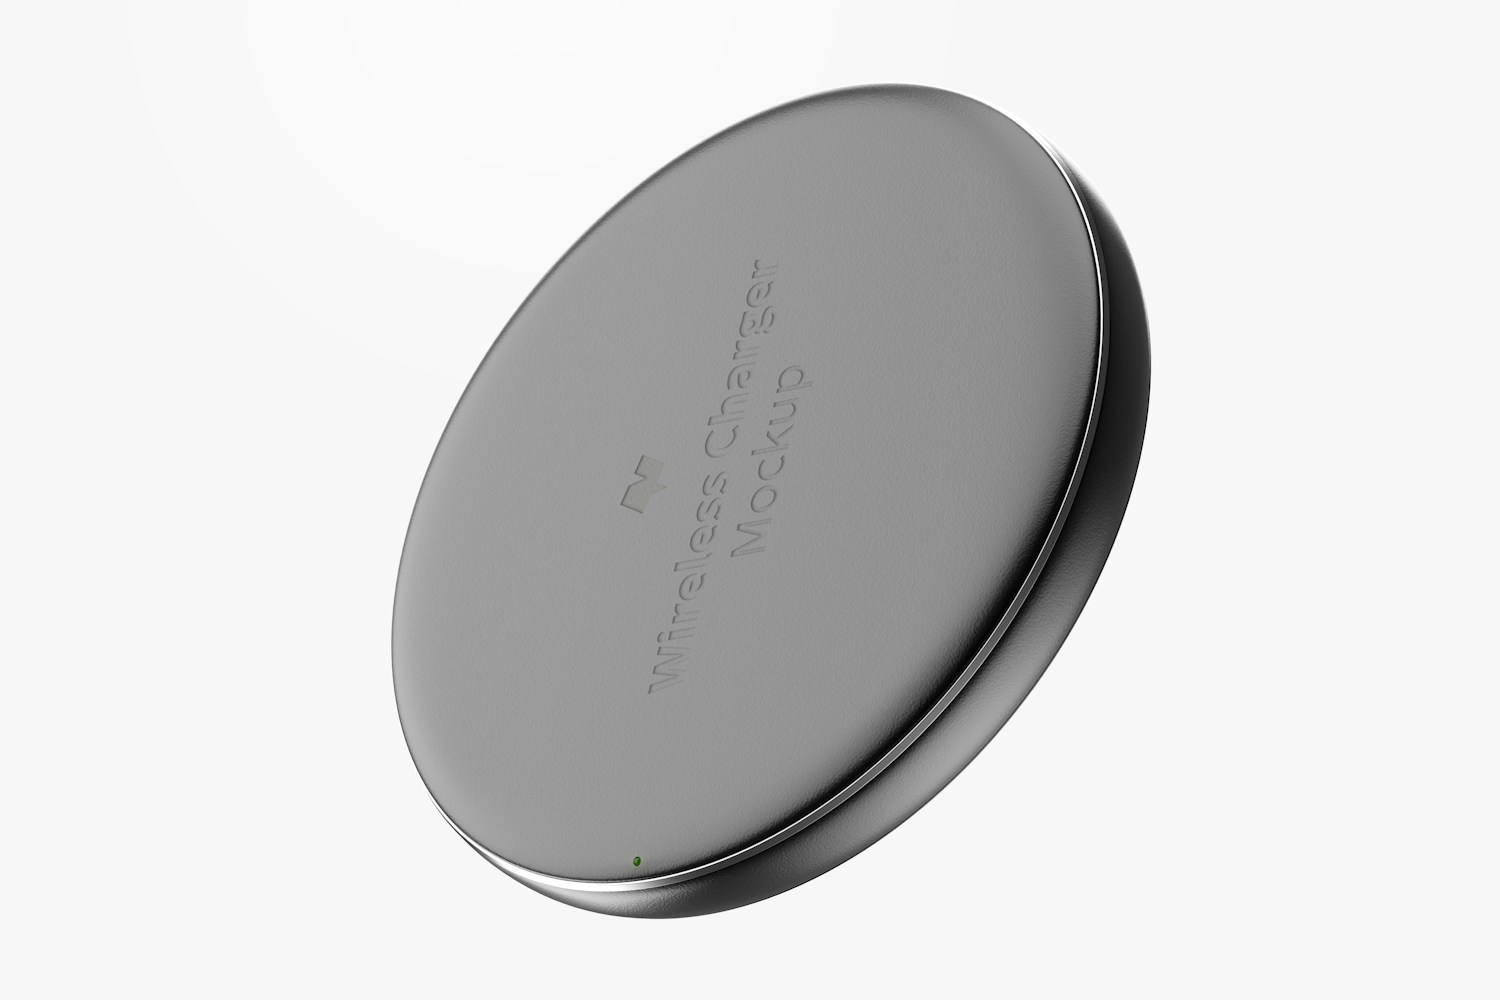 Wireless Charger Mockup, Floating